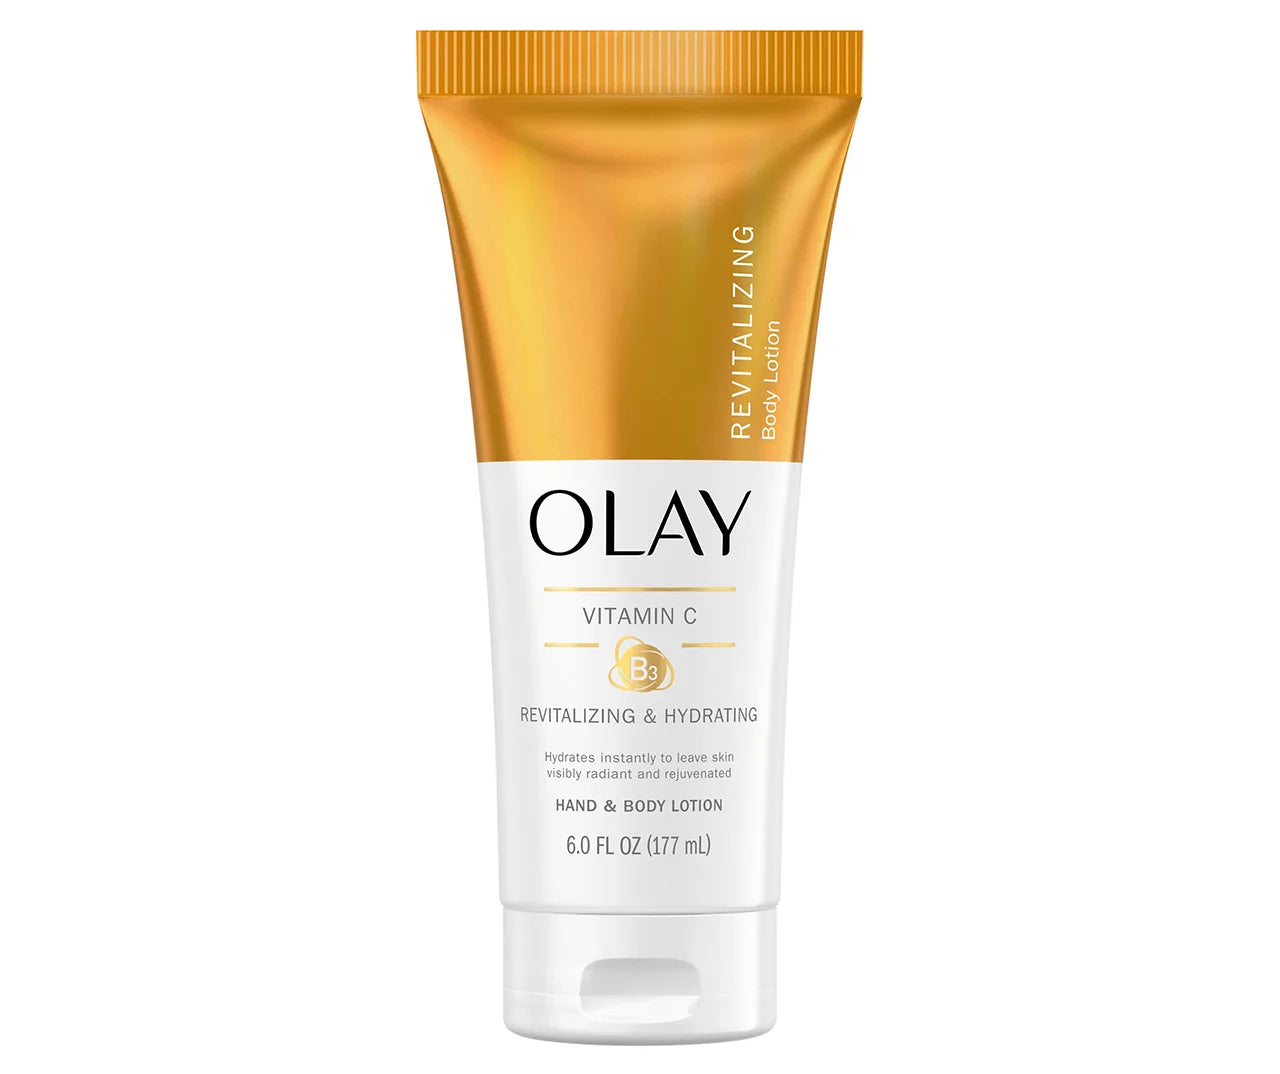 OLAY brightening holiday collection